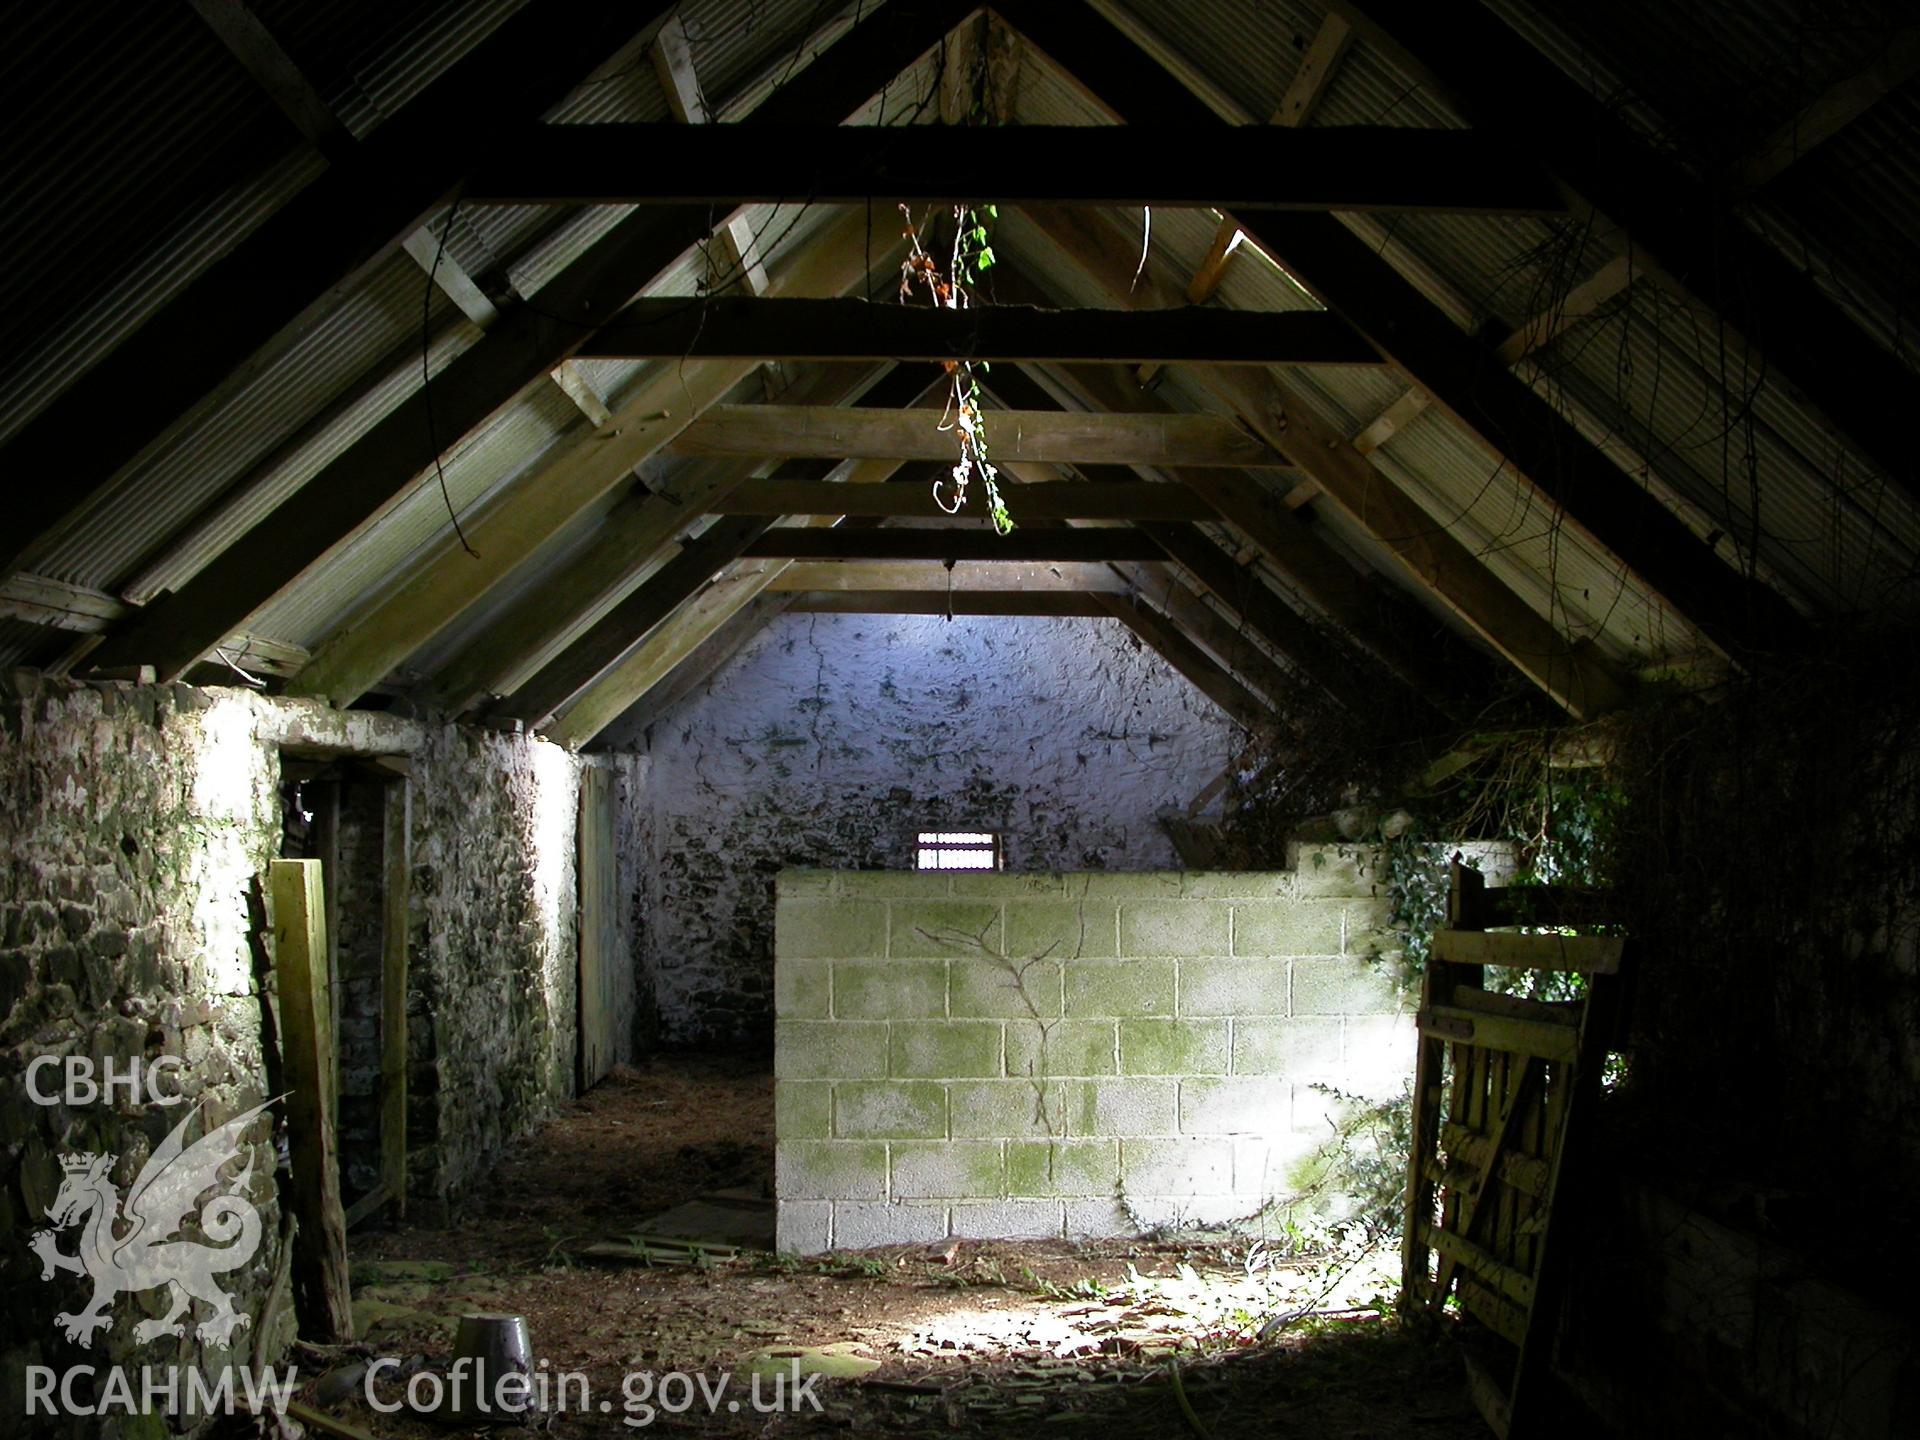 Interior of cattle/barn, looking E.